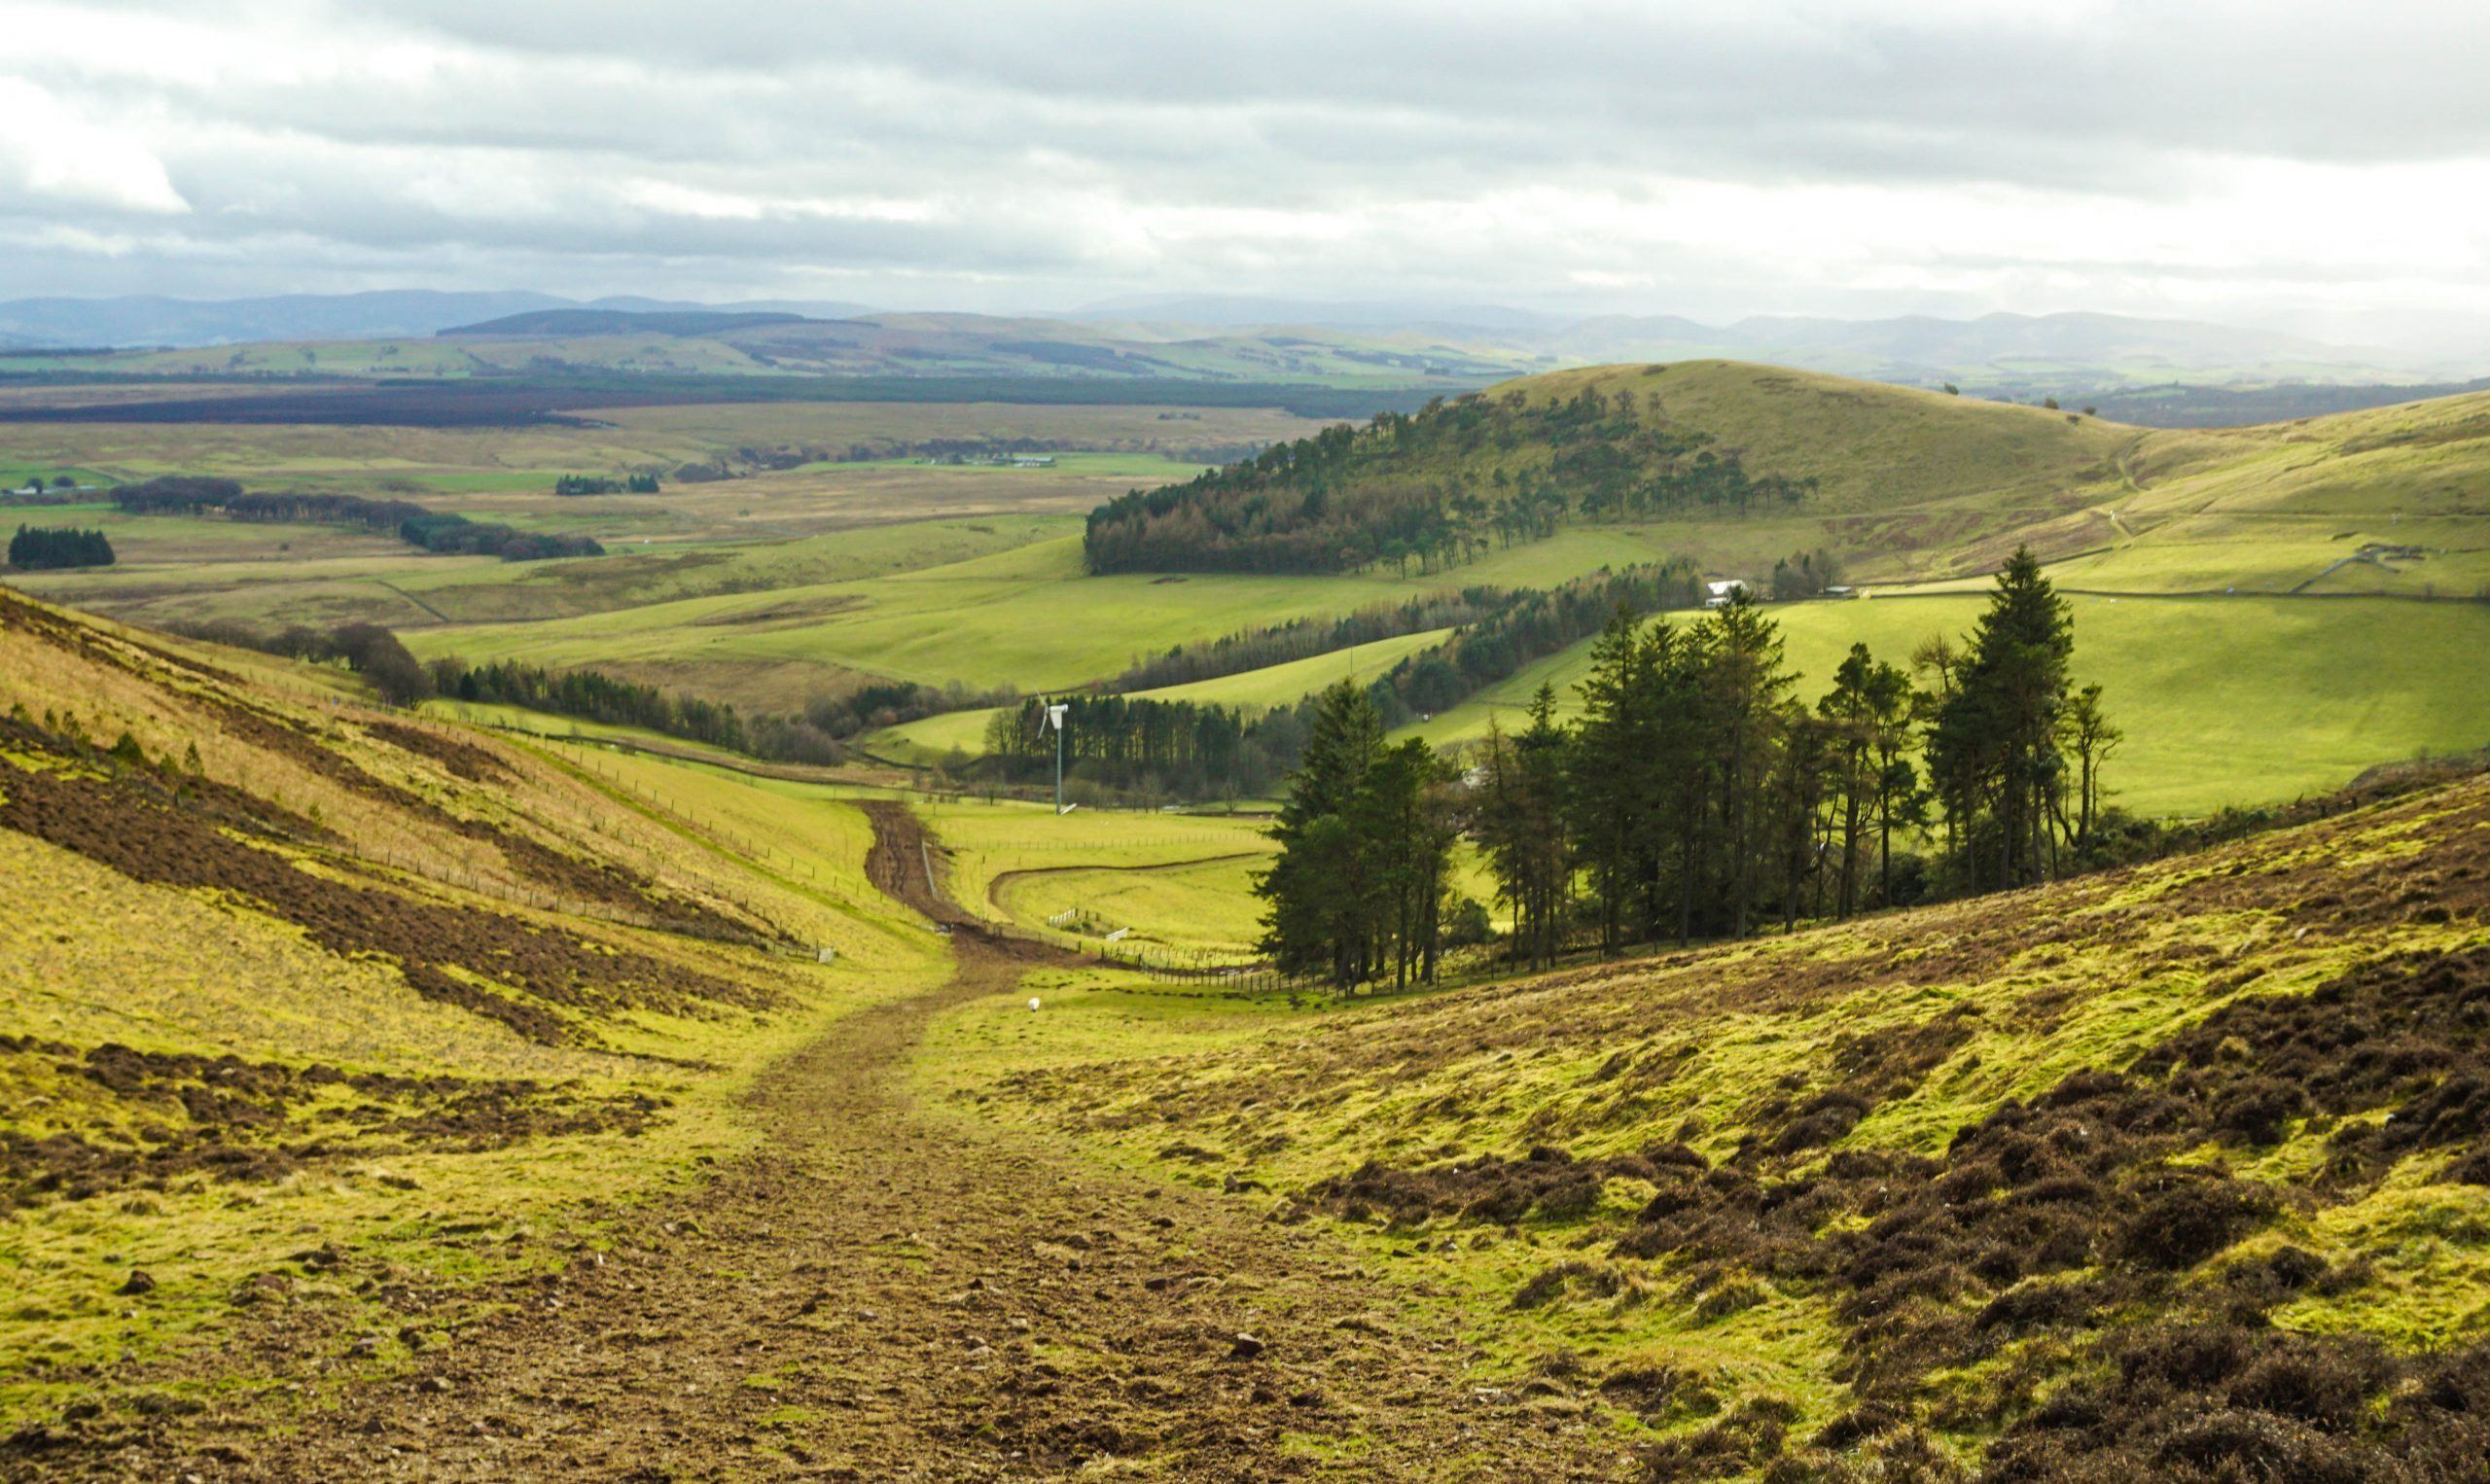 Day Trip to Pentlands